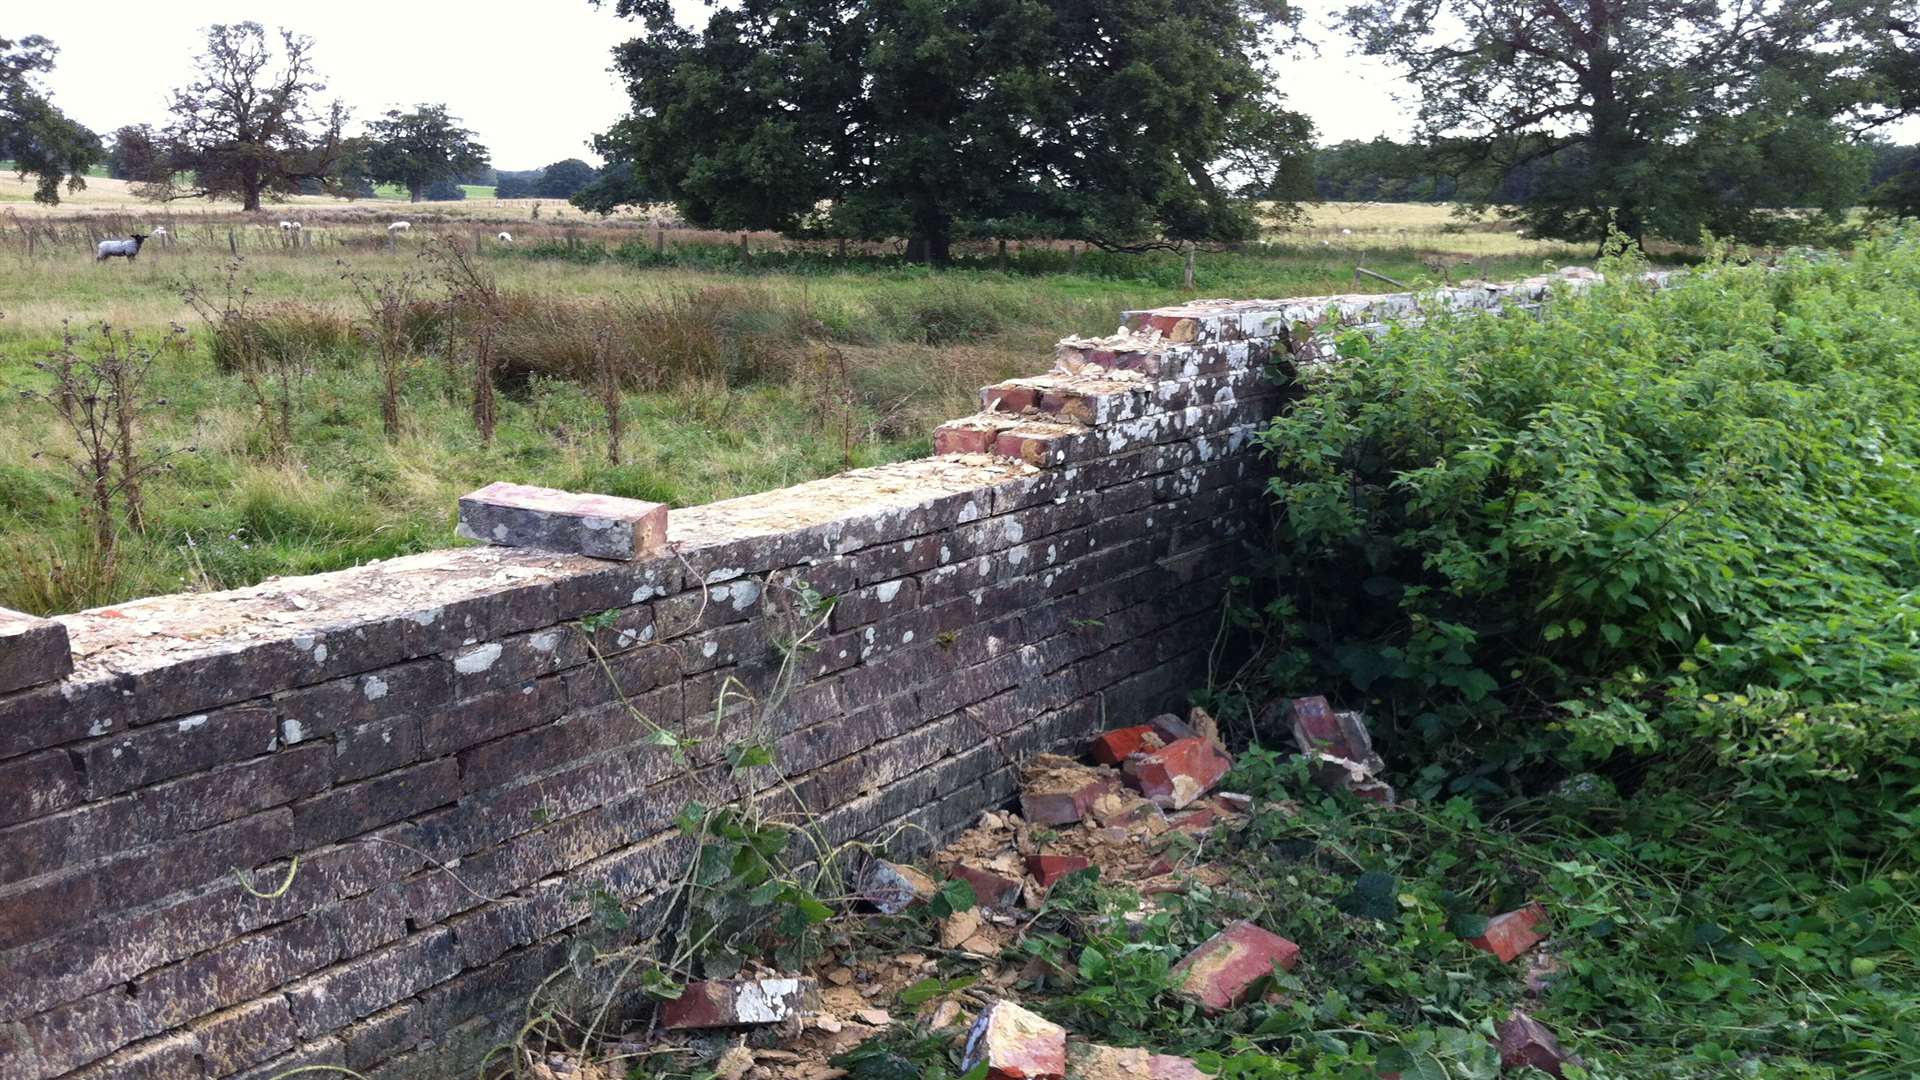 The thieves have damaged the historic wall